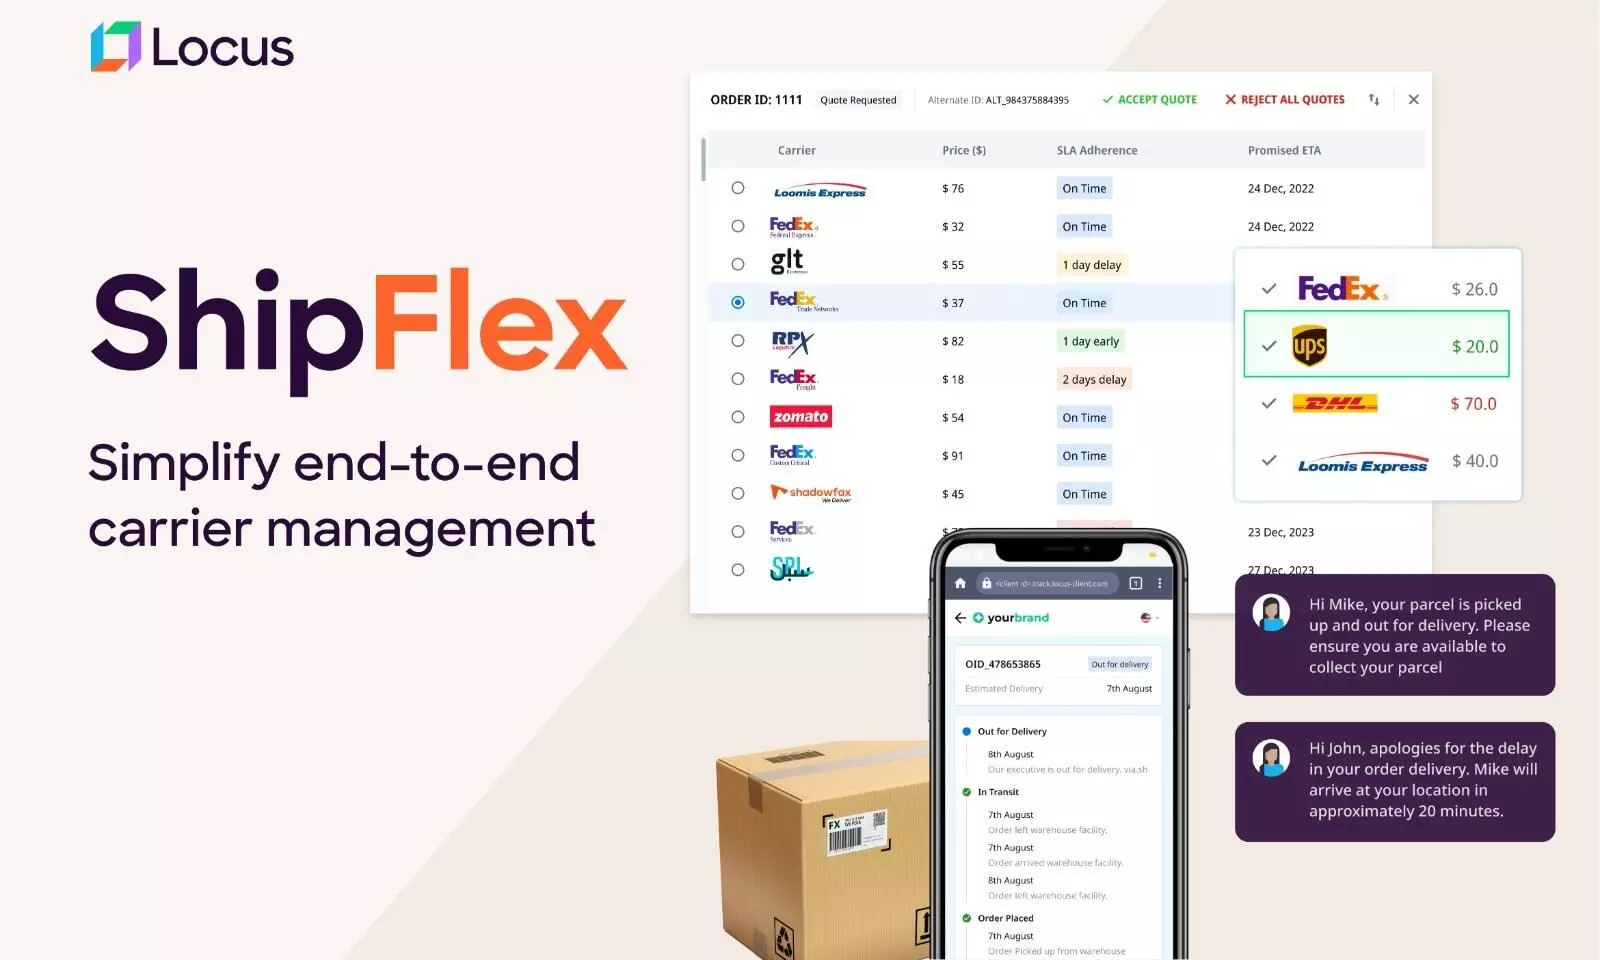 Locus launches ShipFlex for flexible third-party delivery